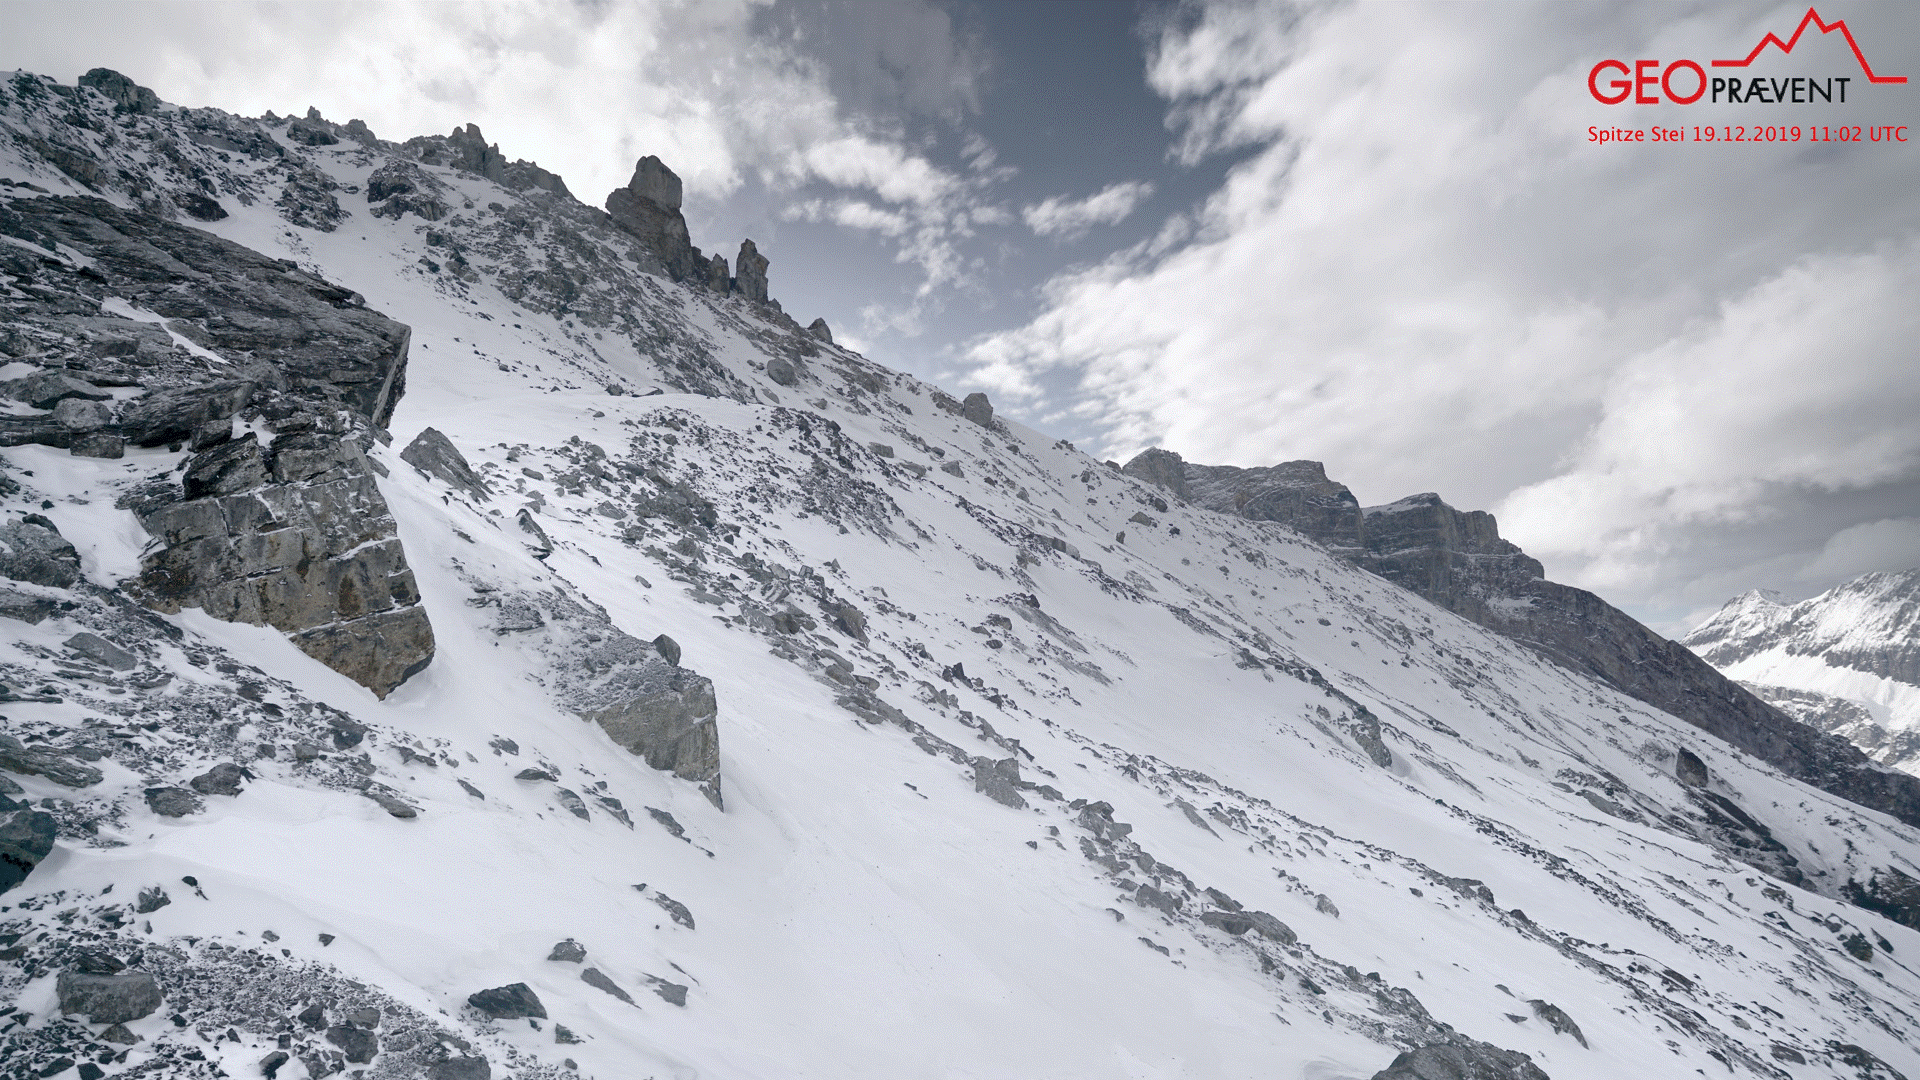 The upper part of Spitze Stei collapses. 